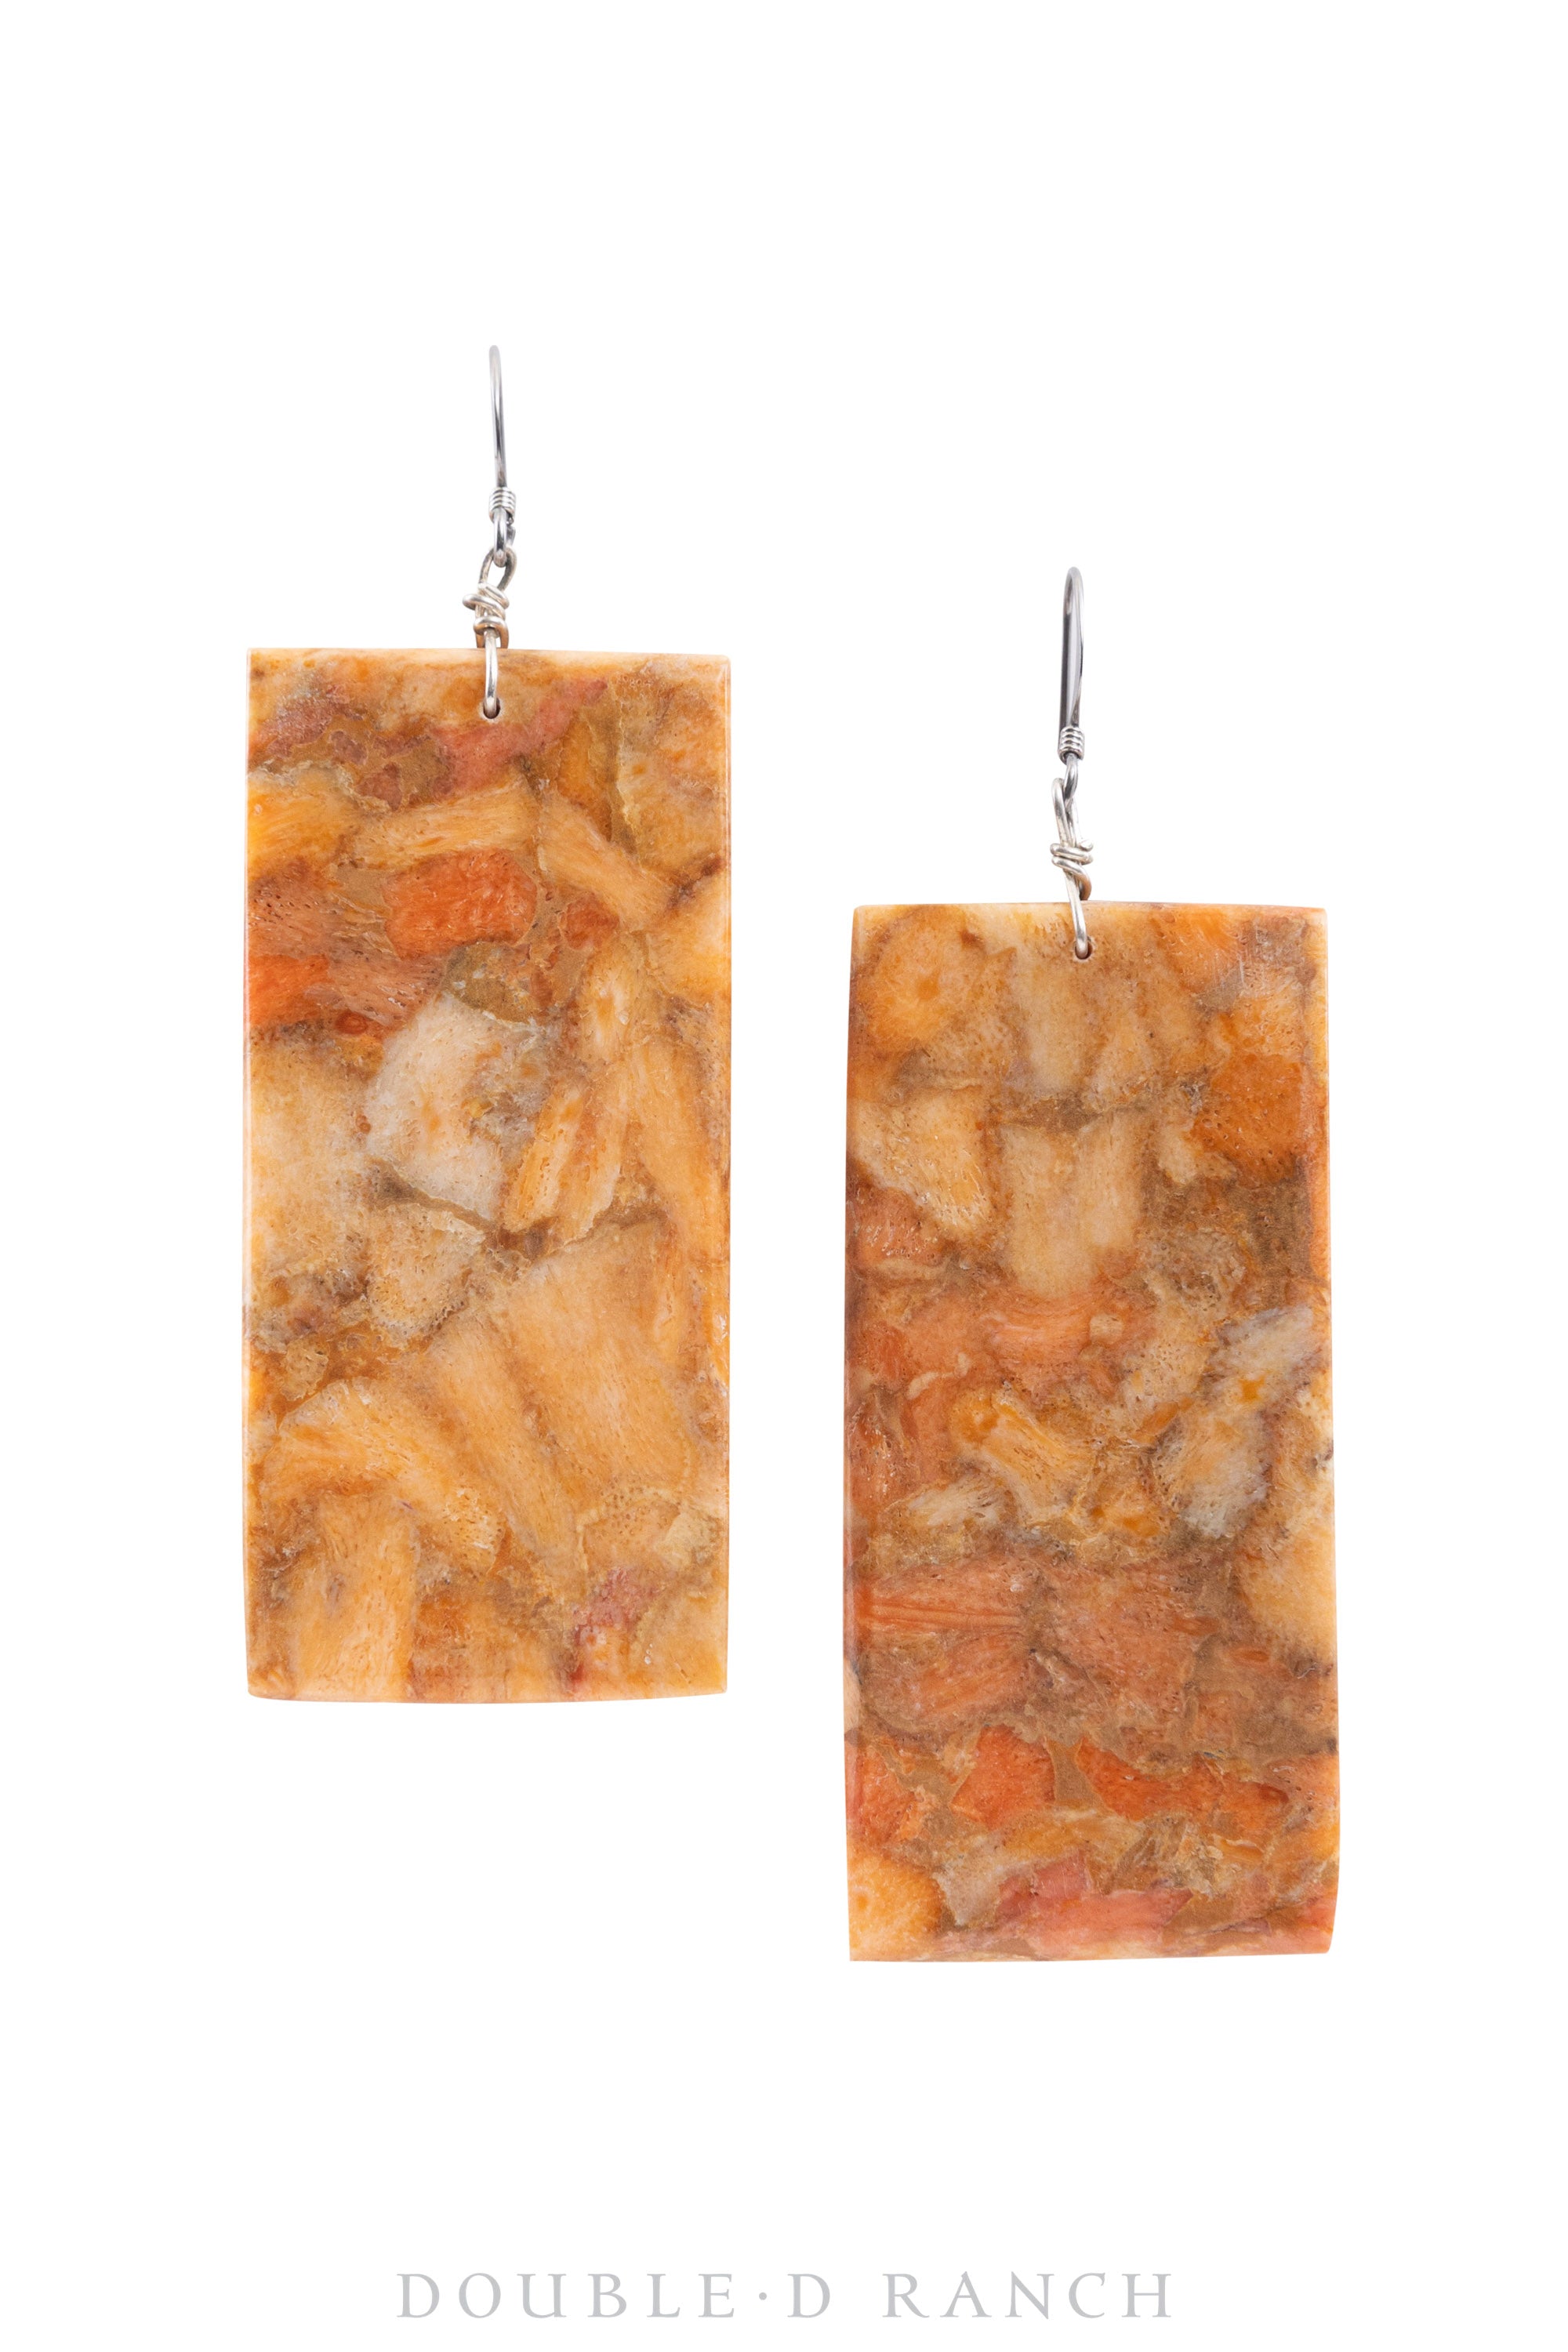 Earrings, Slab, Apple Coral Composite, Artisan, Contemporary, 1359